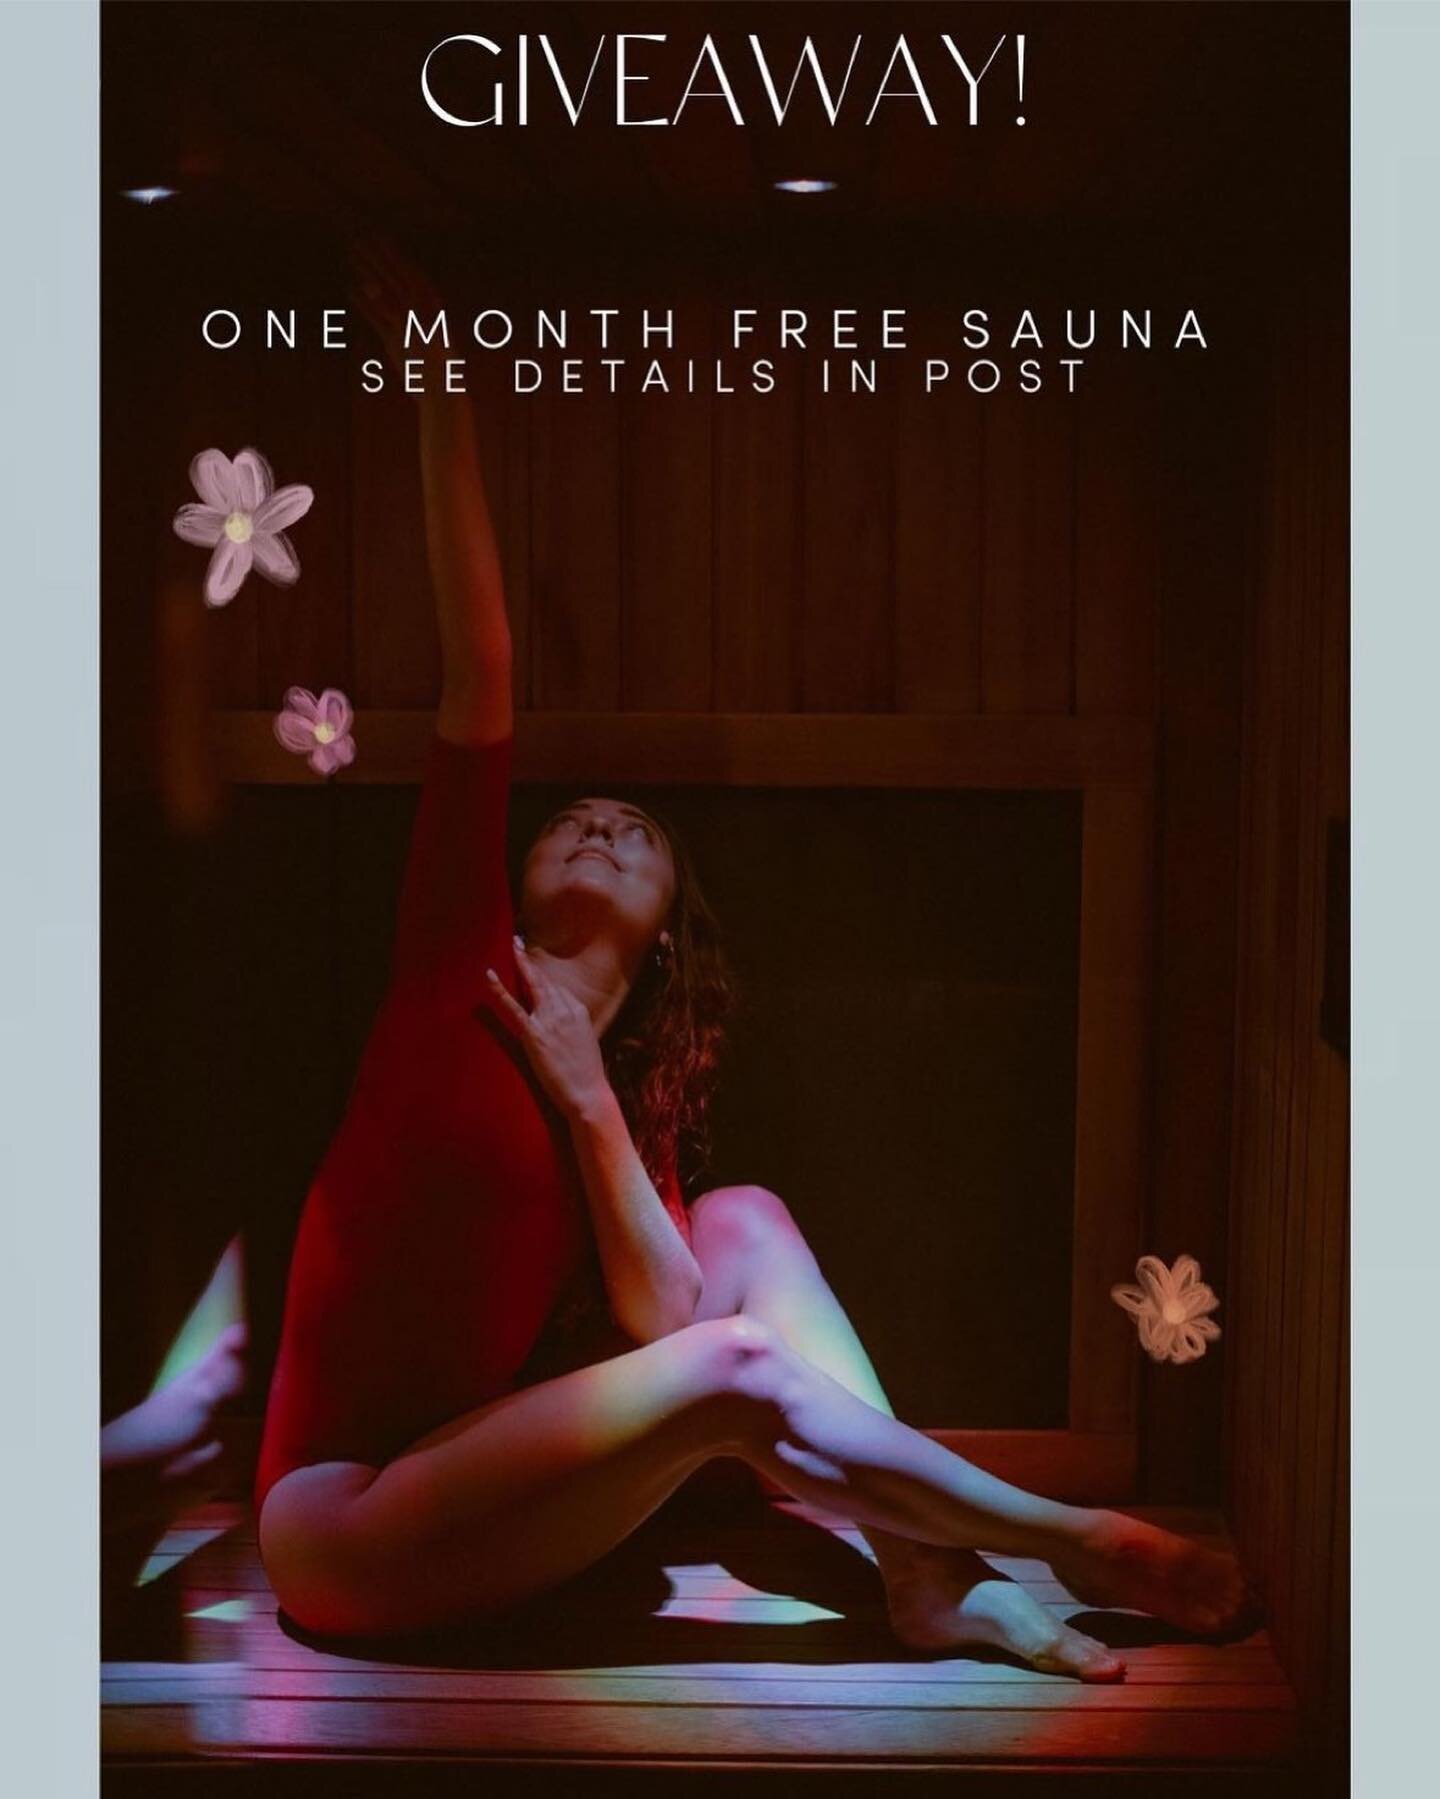 💥Giveaway Details Below! 
We are so excited to open our doors on May14th!
We cannot wait to serve our community in Park City with modalities and rituals that enhance health and vitality. 

Enter our giveaway and win: ONE FREE MONTH OF INFRARED SAUNA